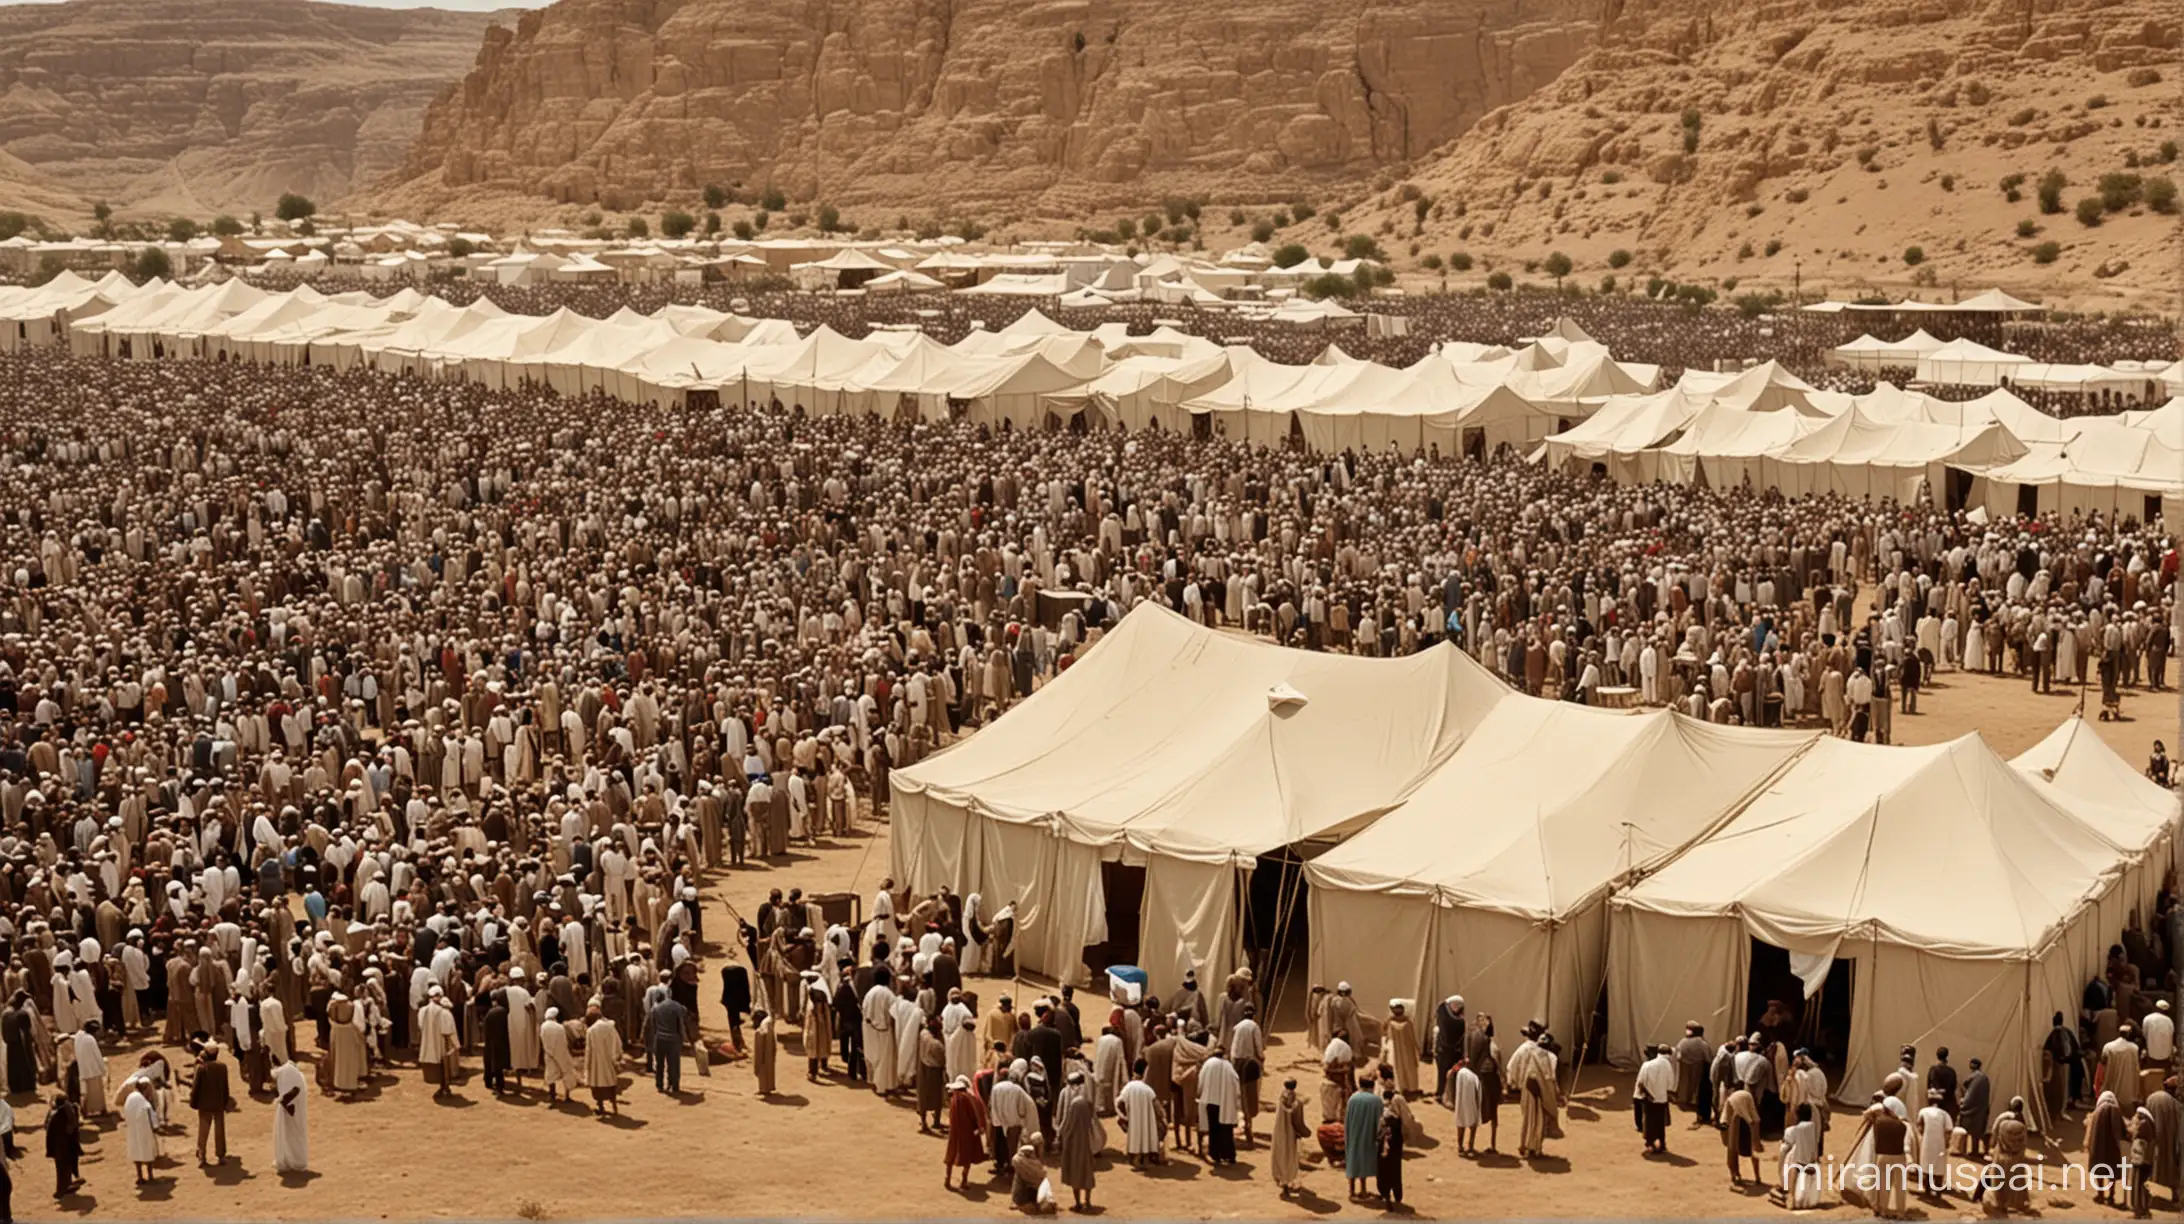 Large crowd, Jewish tabernacle and tents in moses era